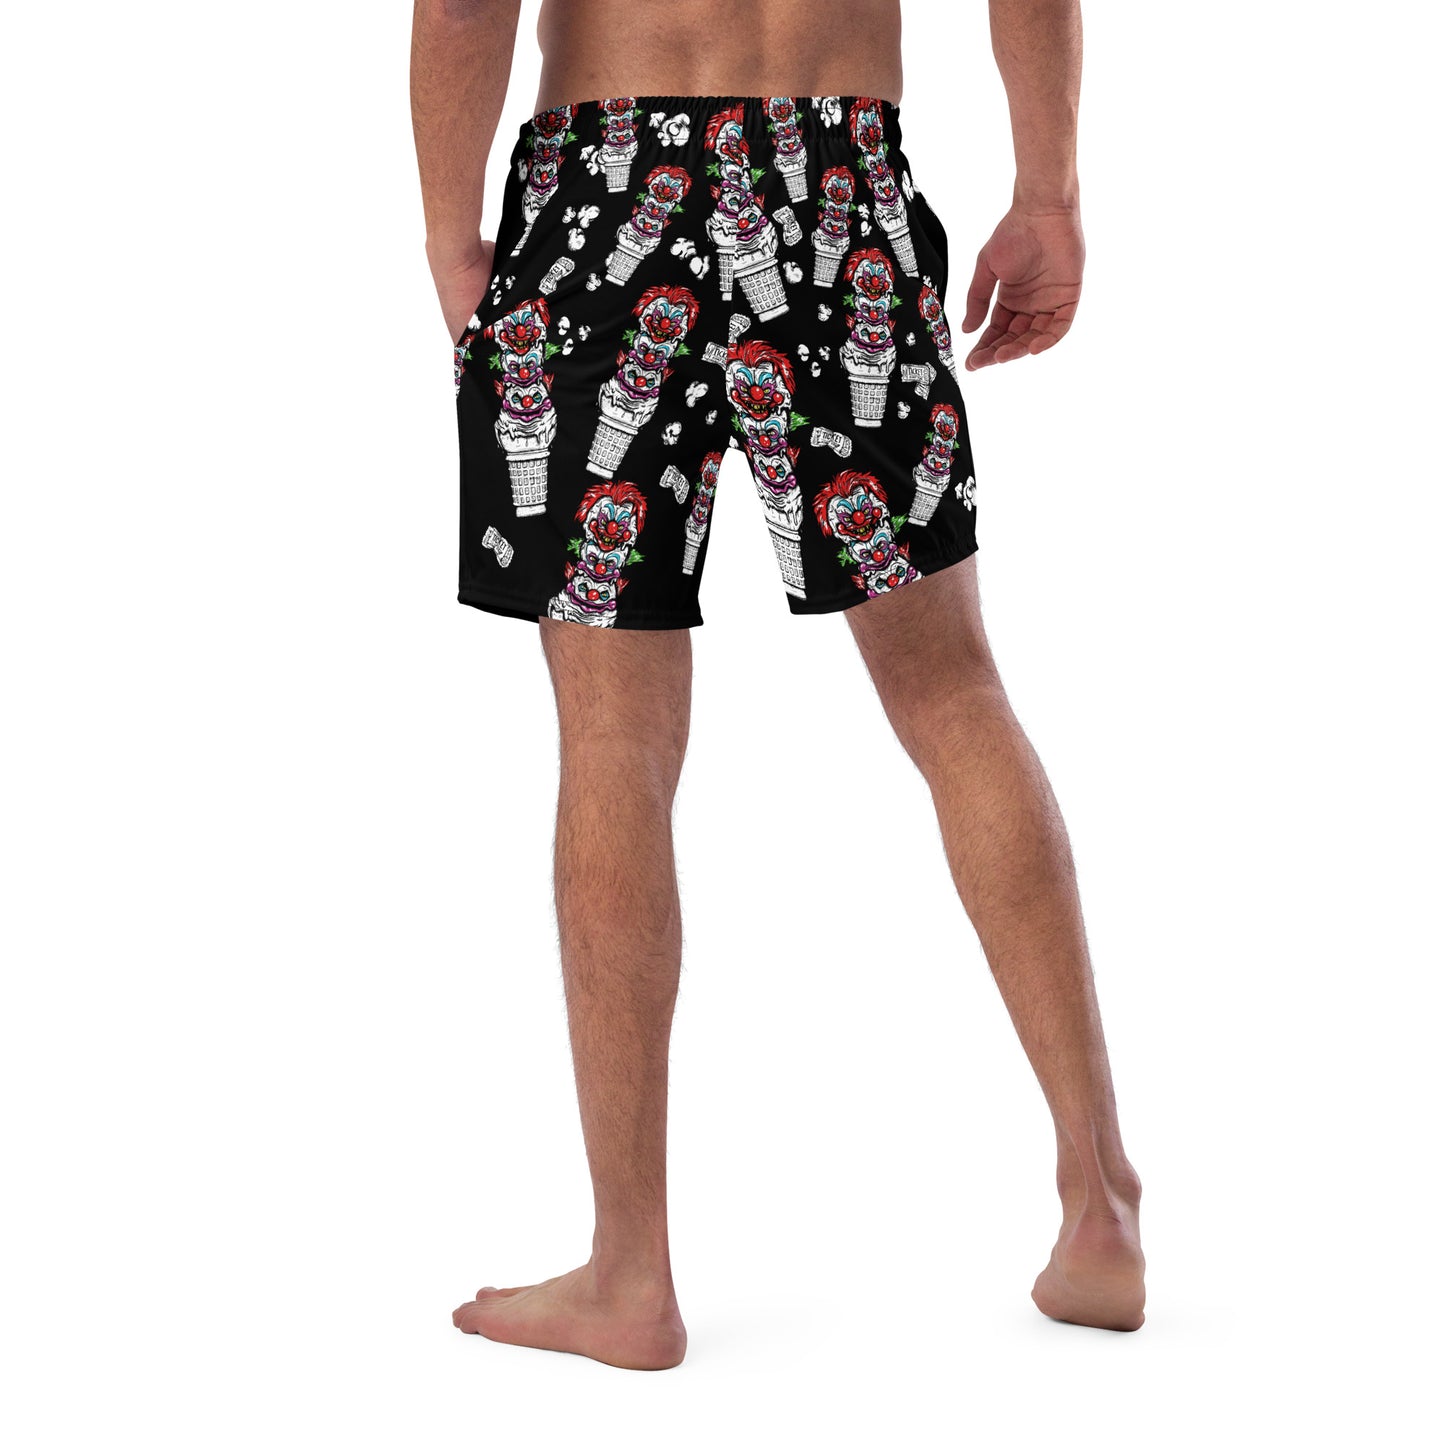 Killer Klowns From Outer Space Ice Cream Swim trunks